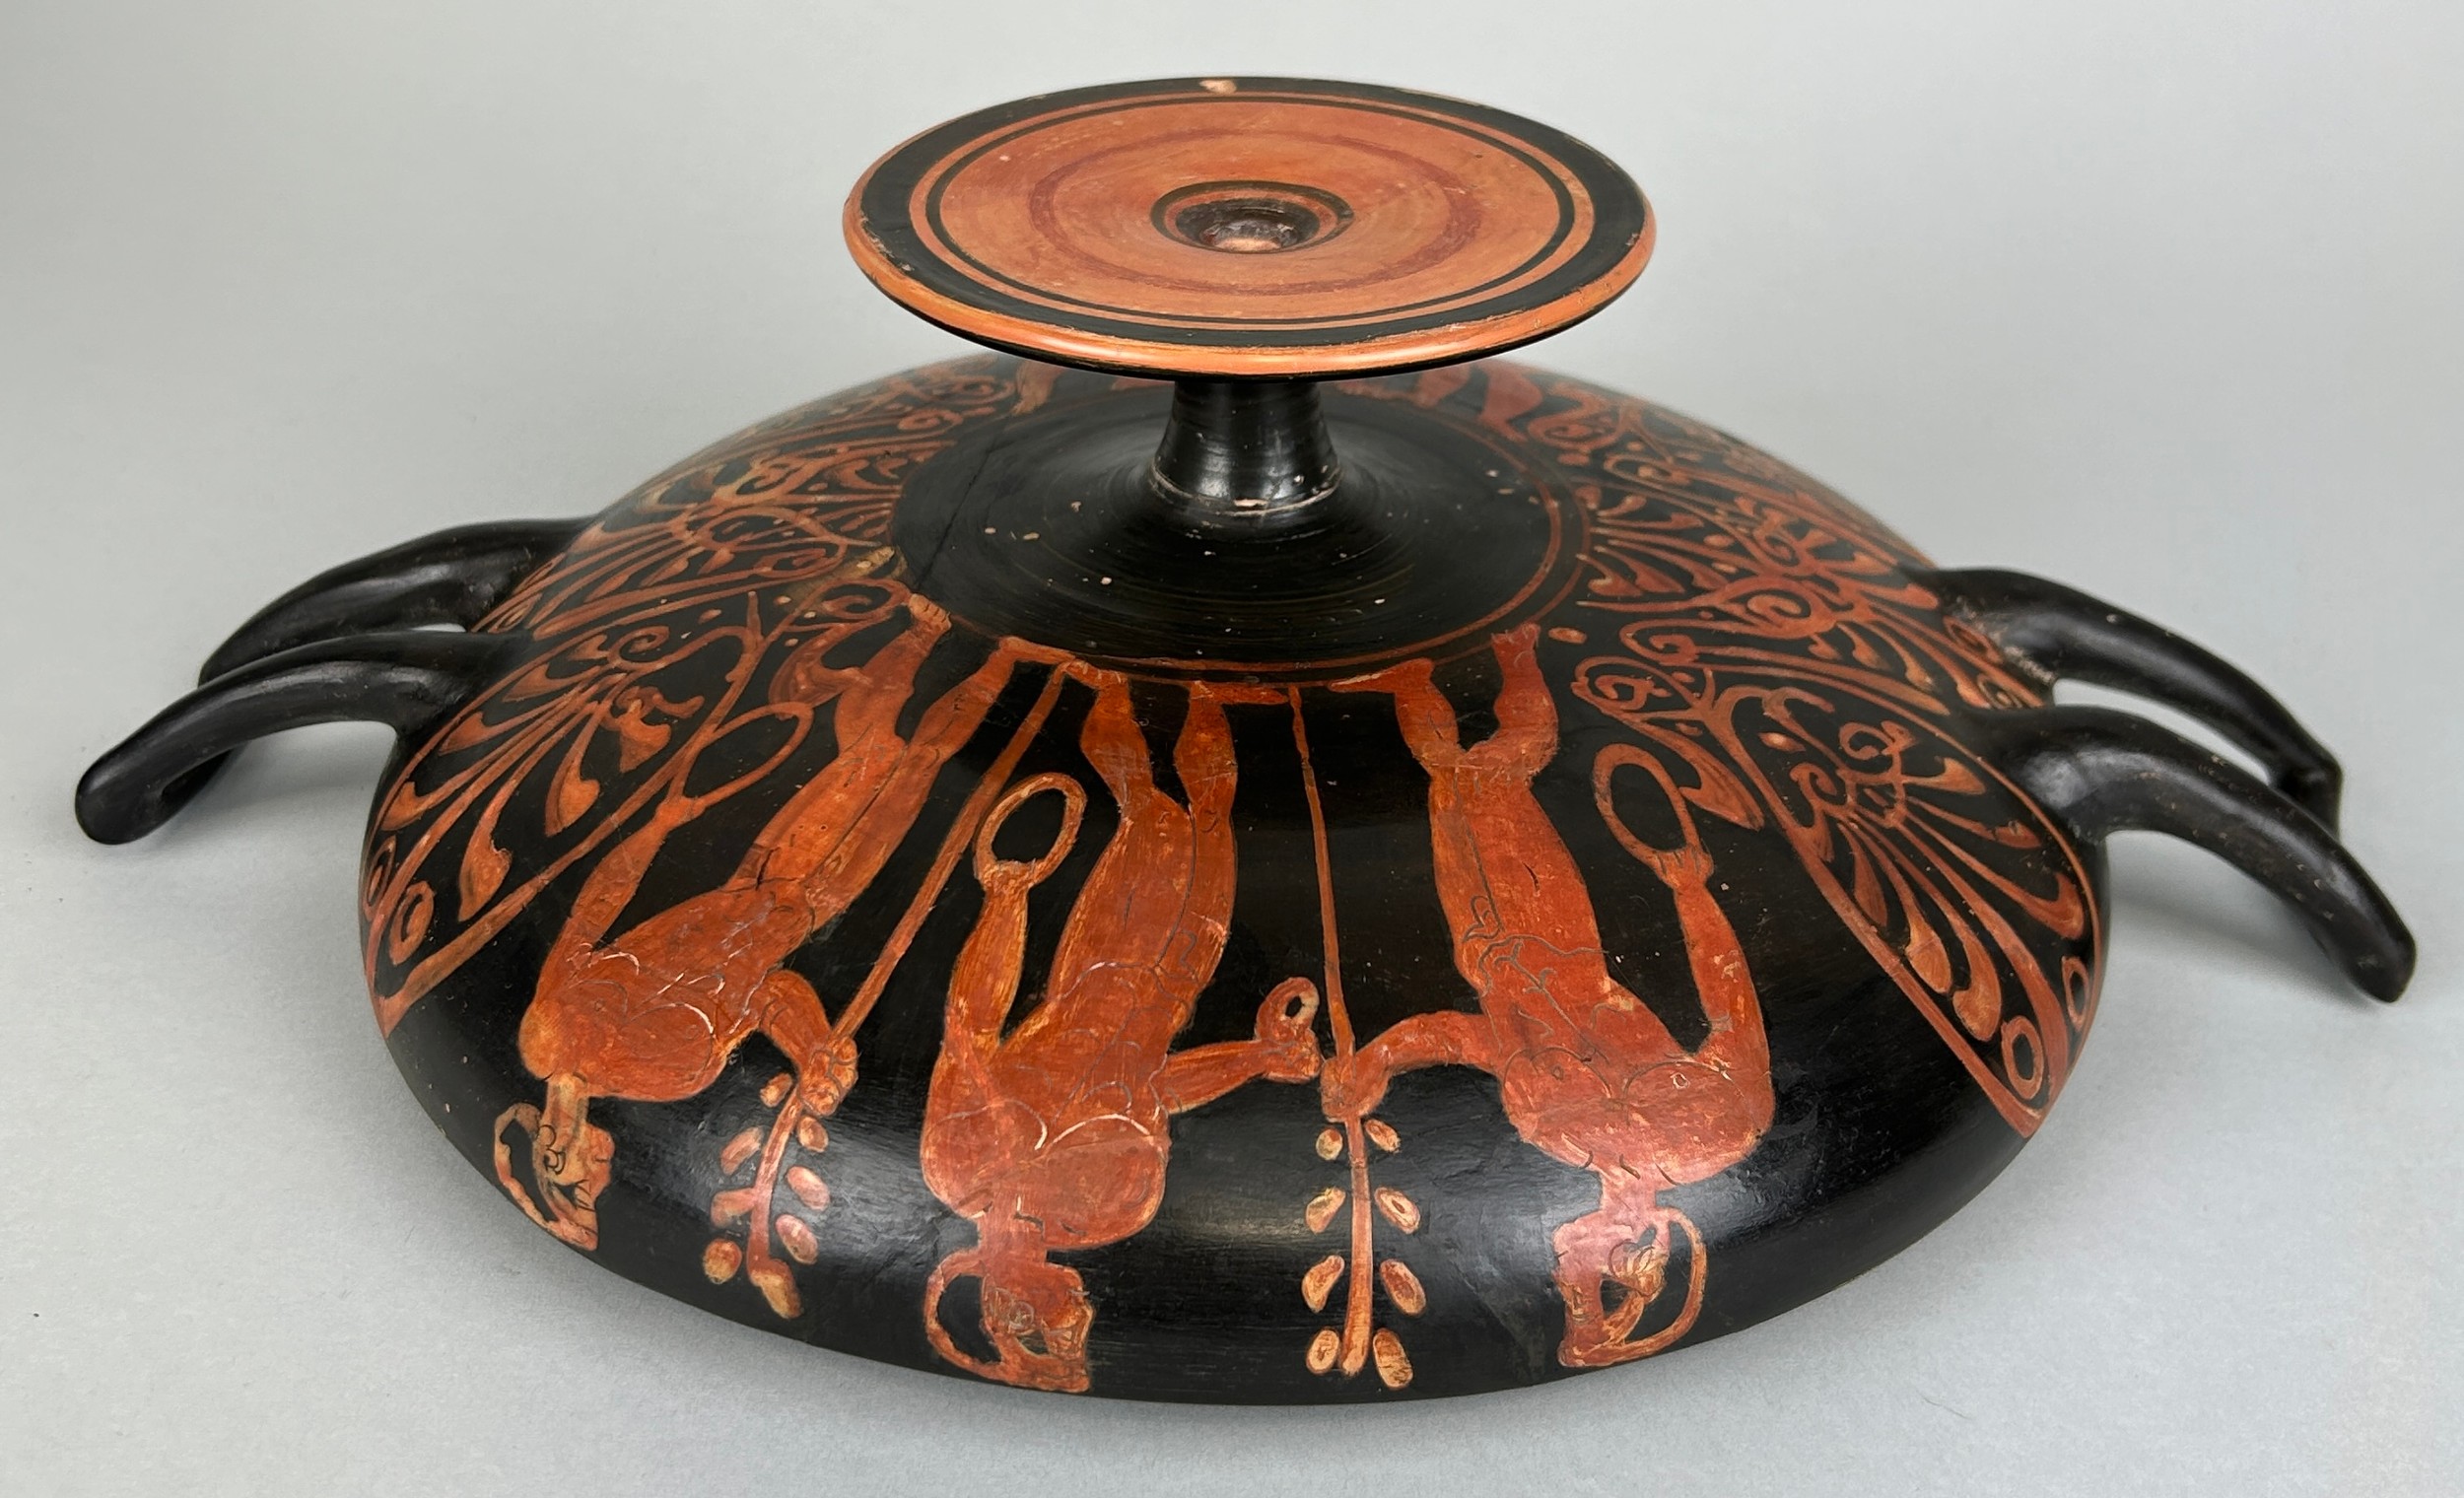 AN APULIAN POTTERY KYLIX DECORATED WITH A HORSE AND RIDER CIRCA 5TH CENTURY B.C. - Image 4 of 10